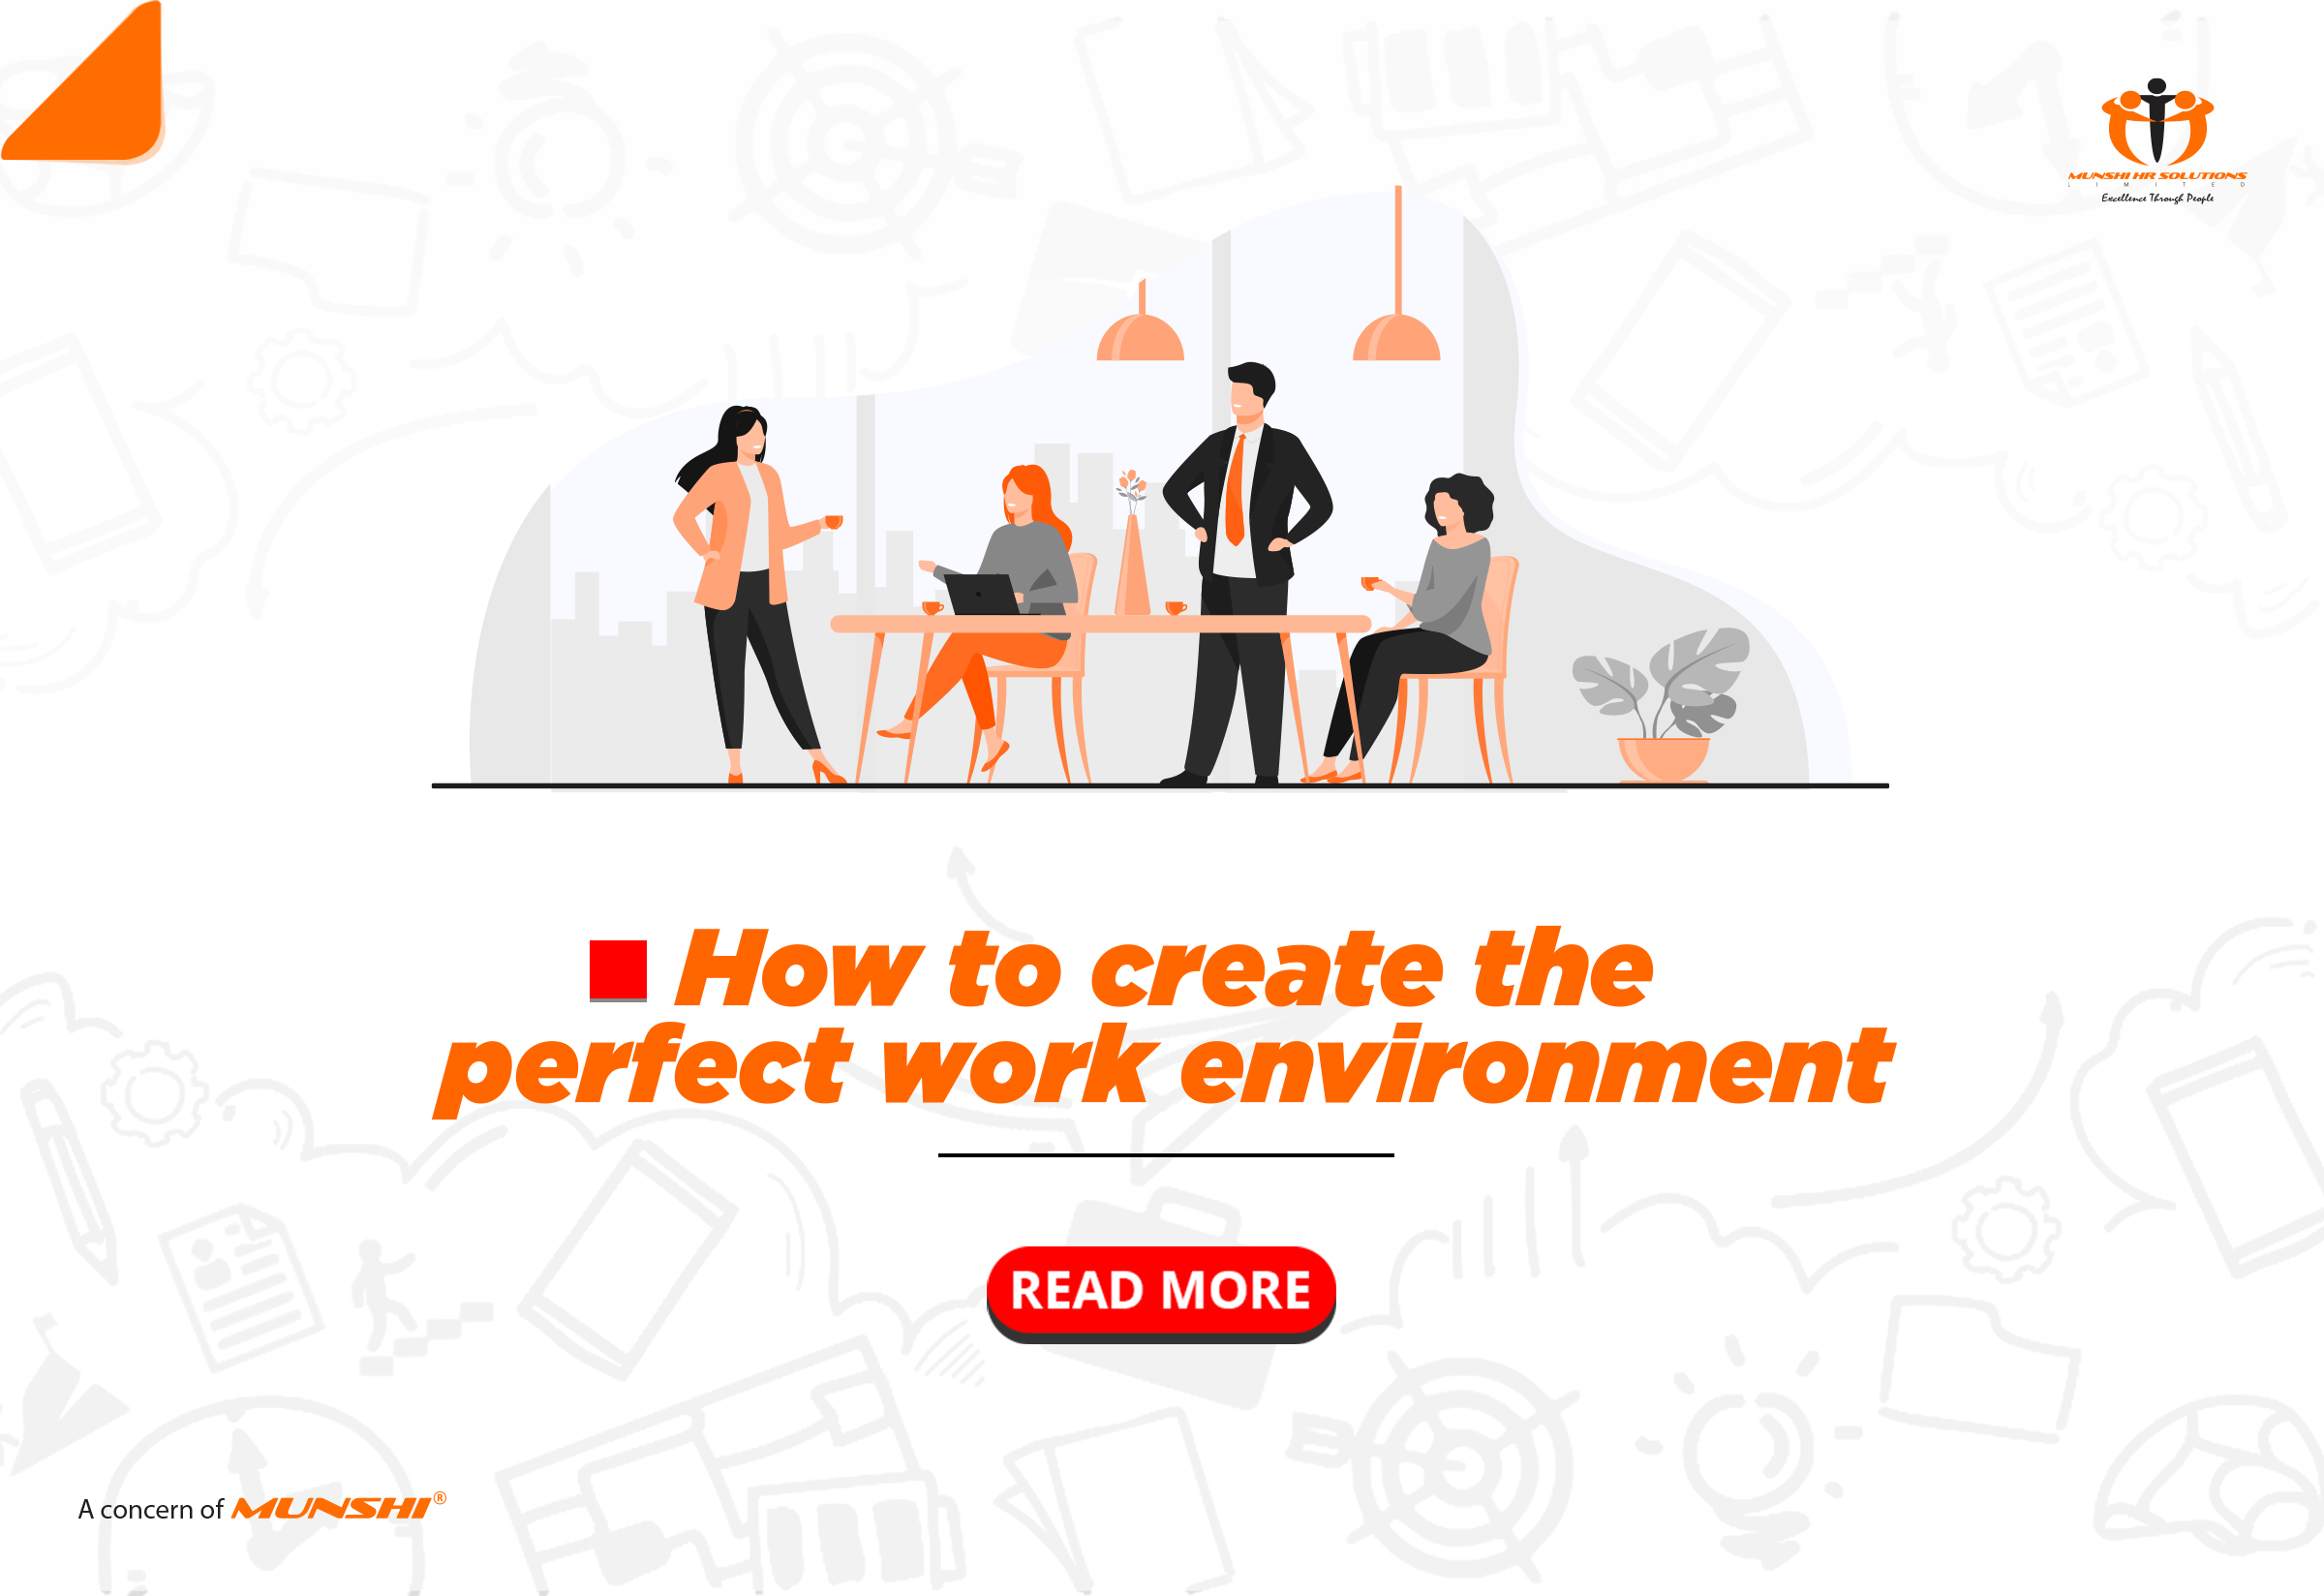 How to create an ideal work environment